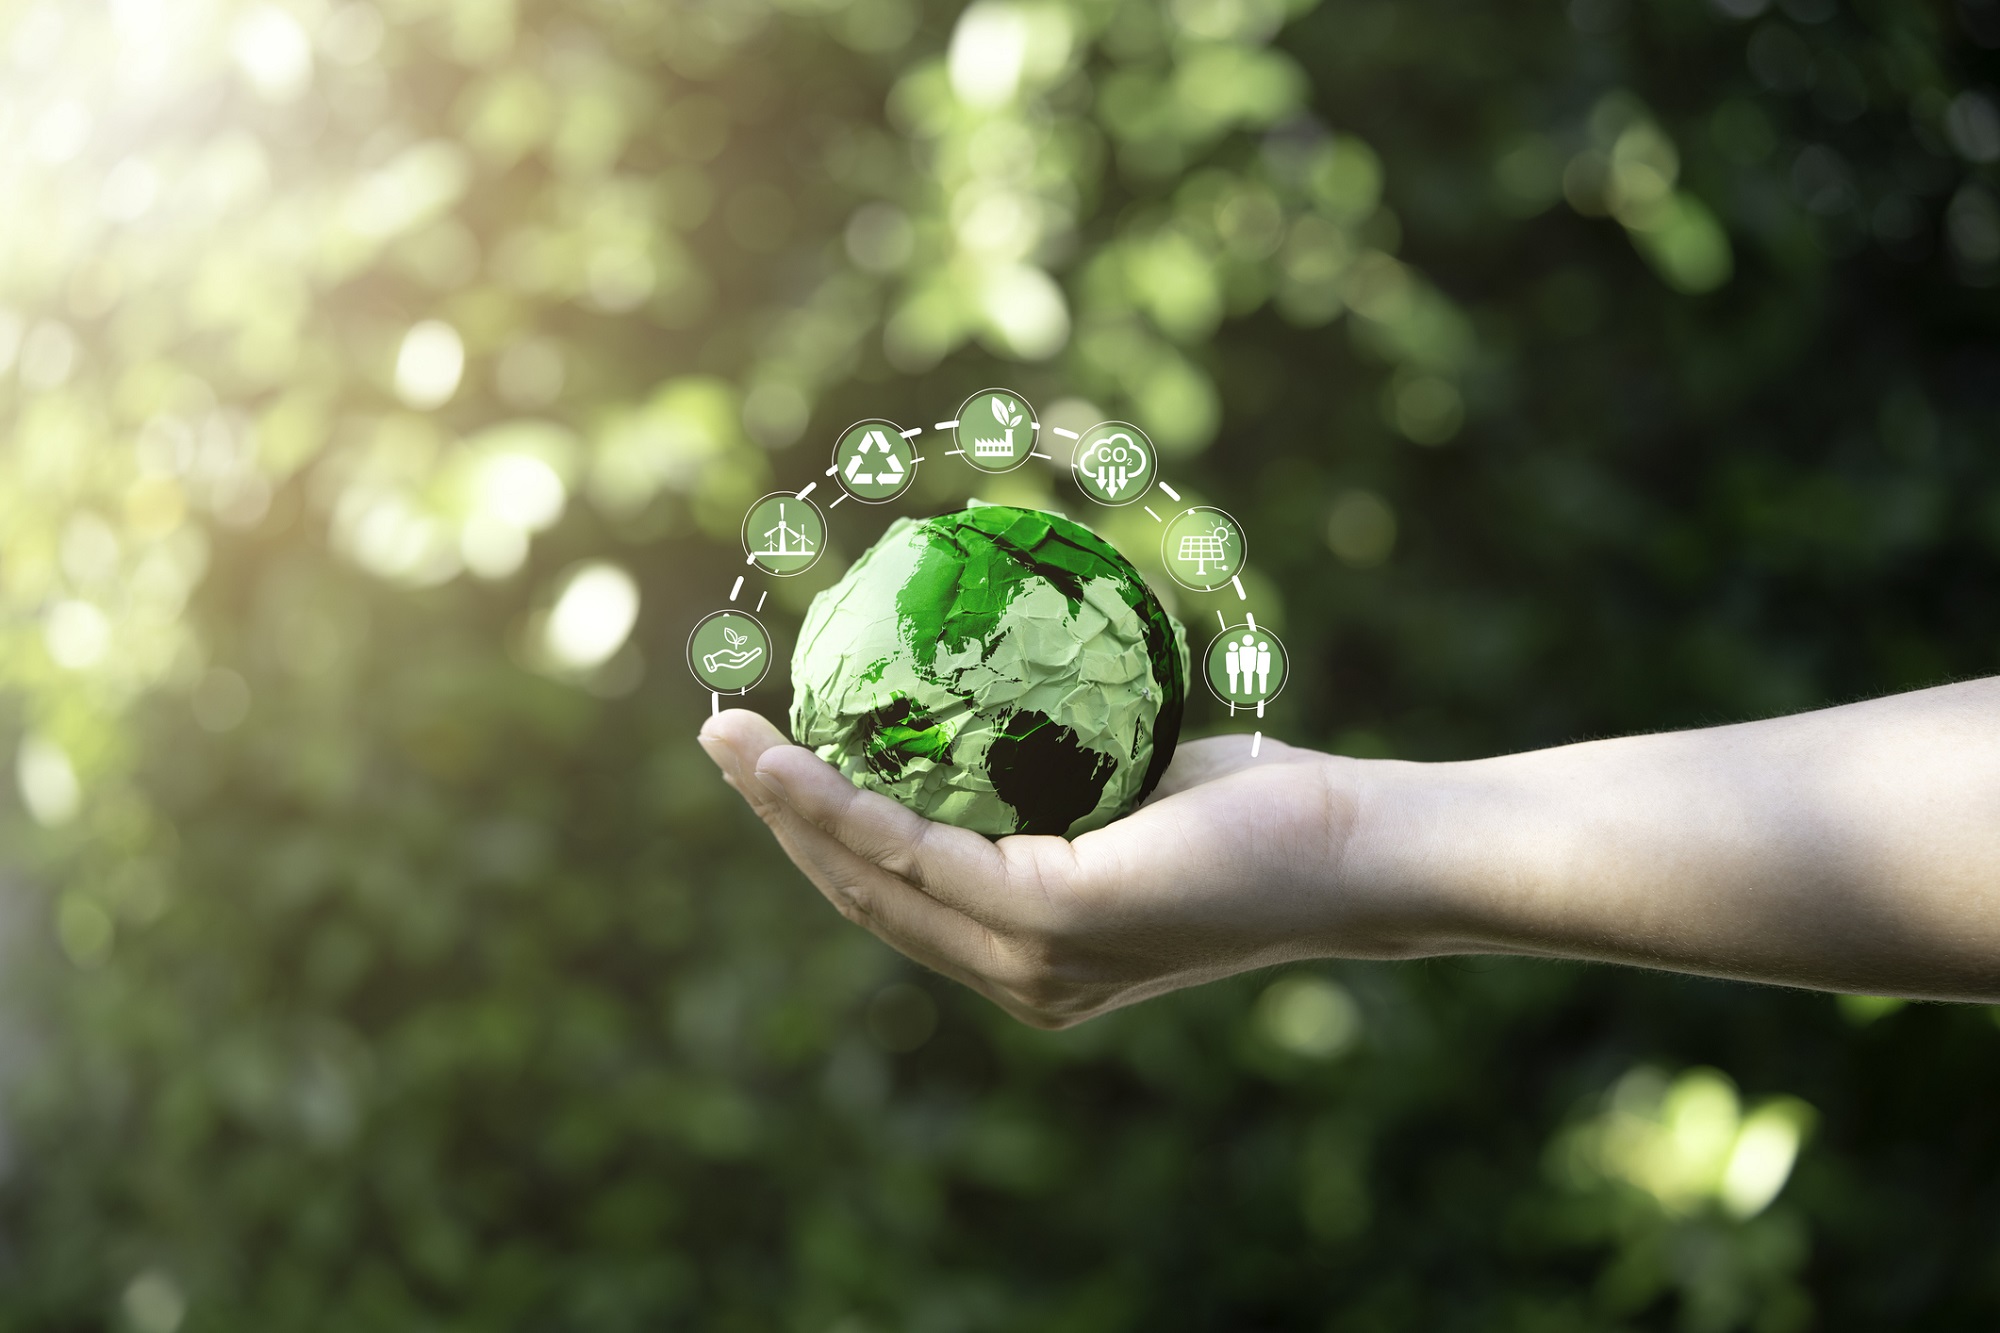 Kenvue Global Head of ESG provides insight into inaugural sustainability report